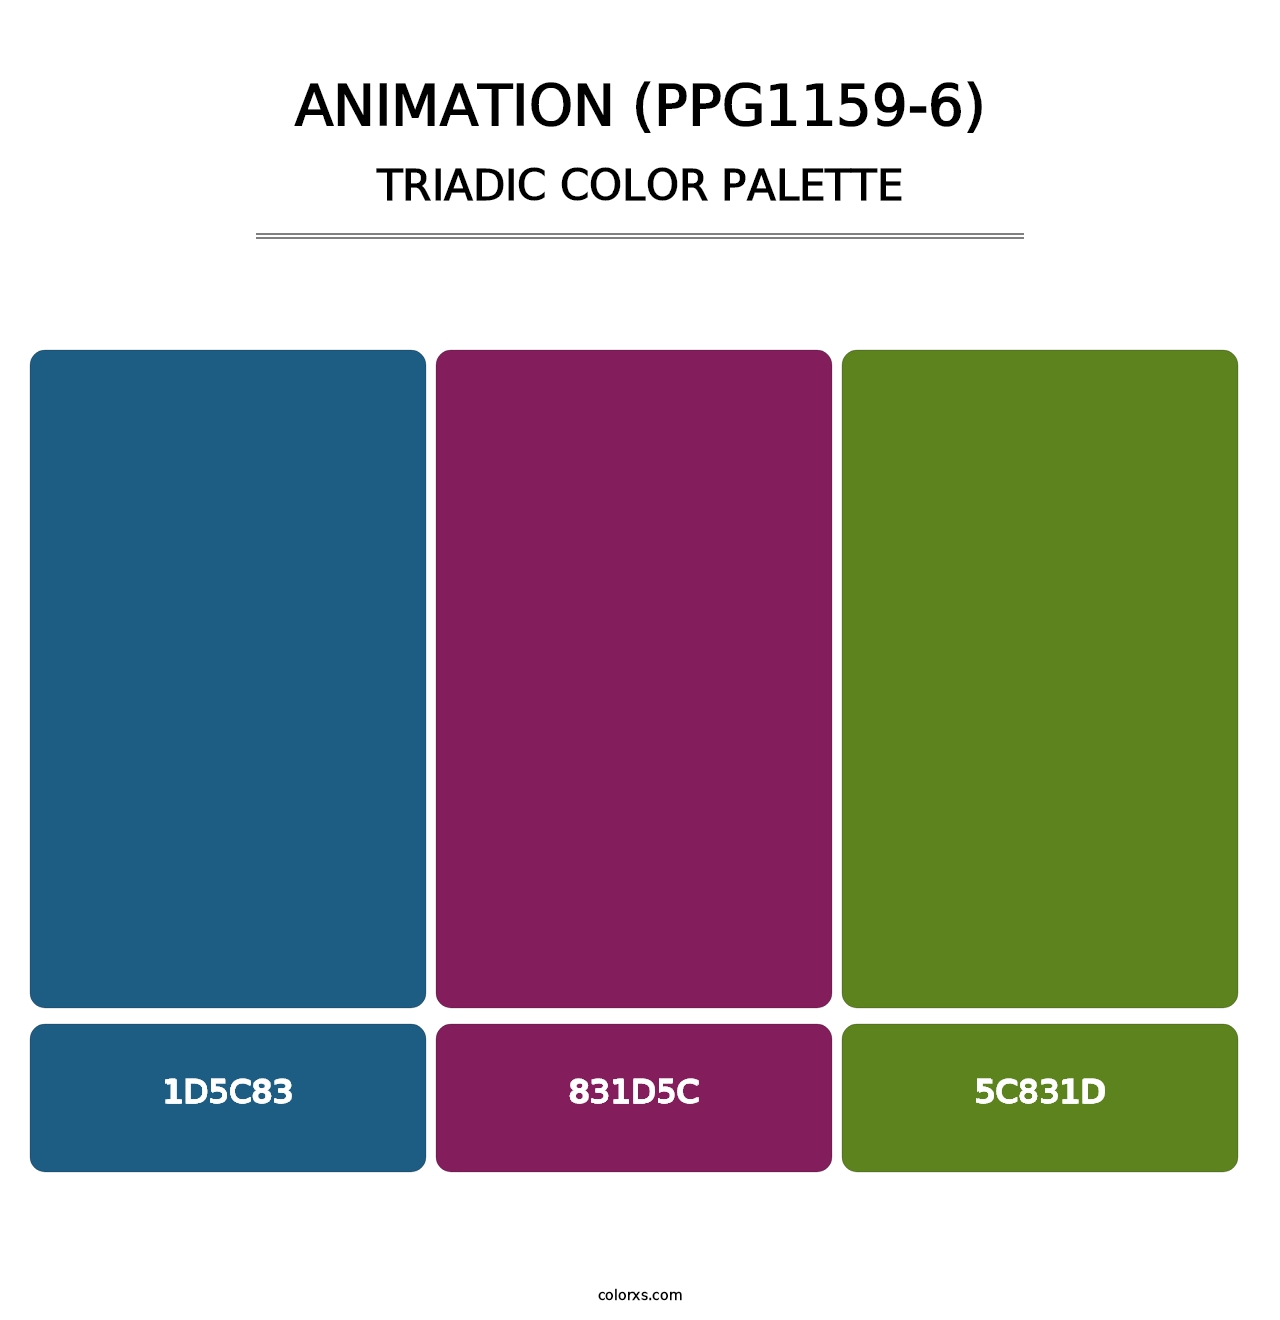 Animation (PPG1159-6) - Triadic Color Palette